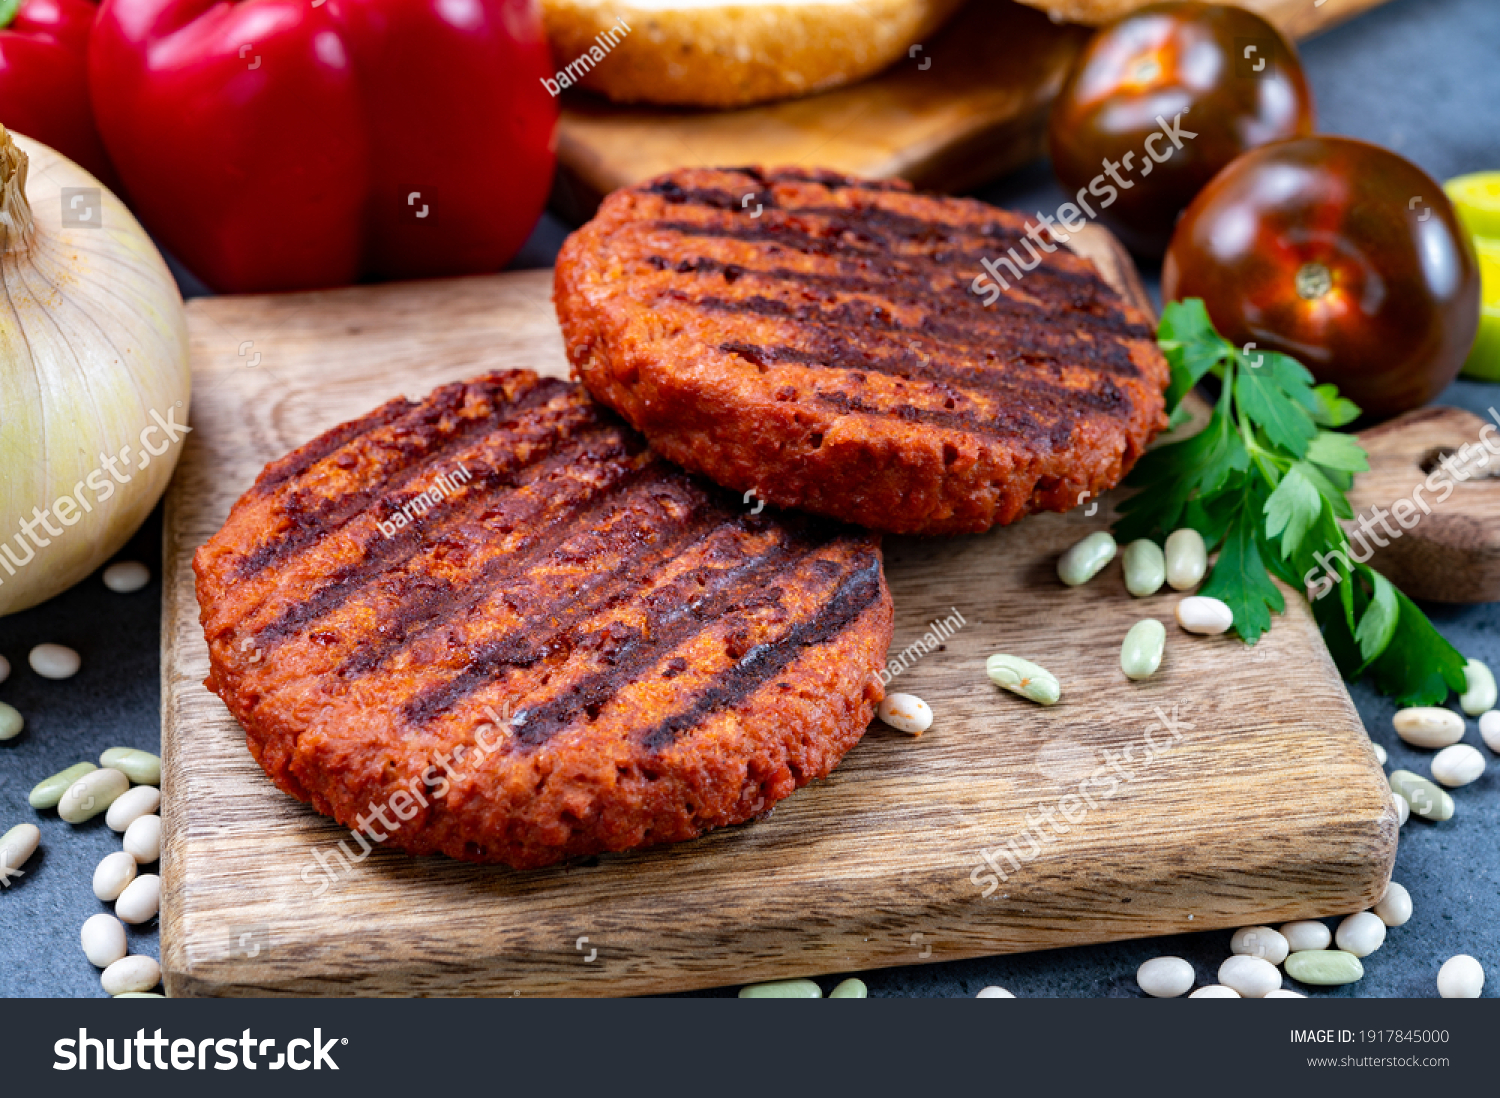 Tasty grilled burger made with vegetarian plant based imitation minced soya beans meat #1917845000